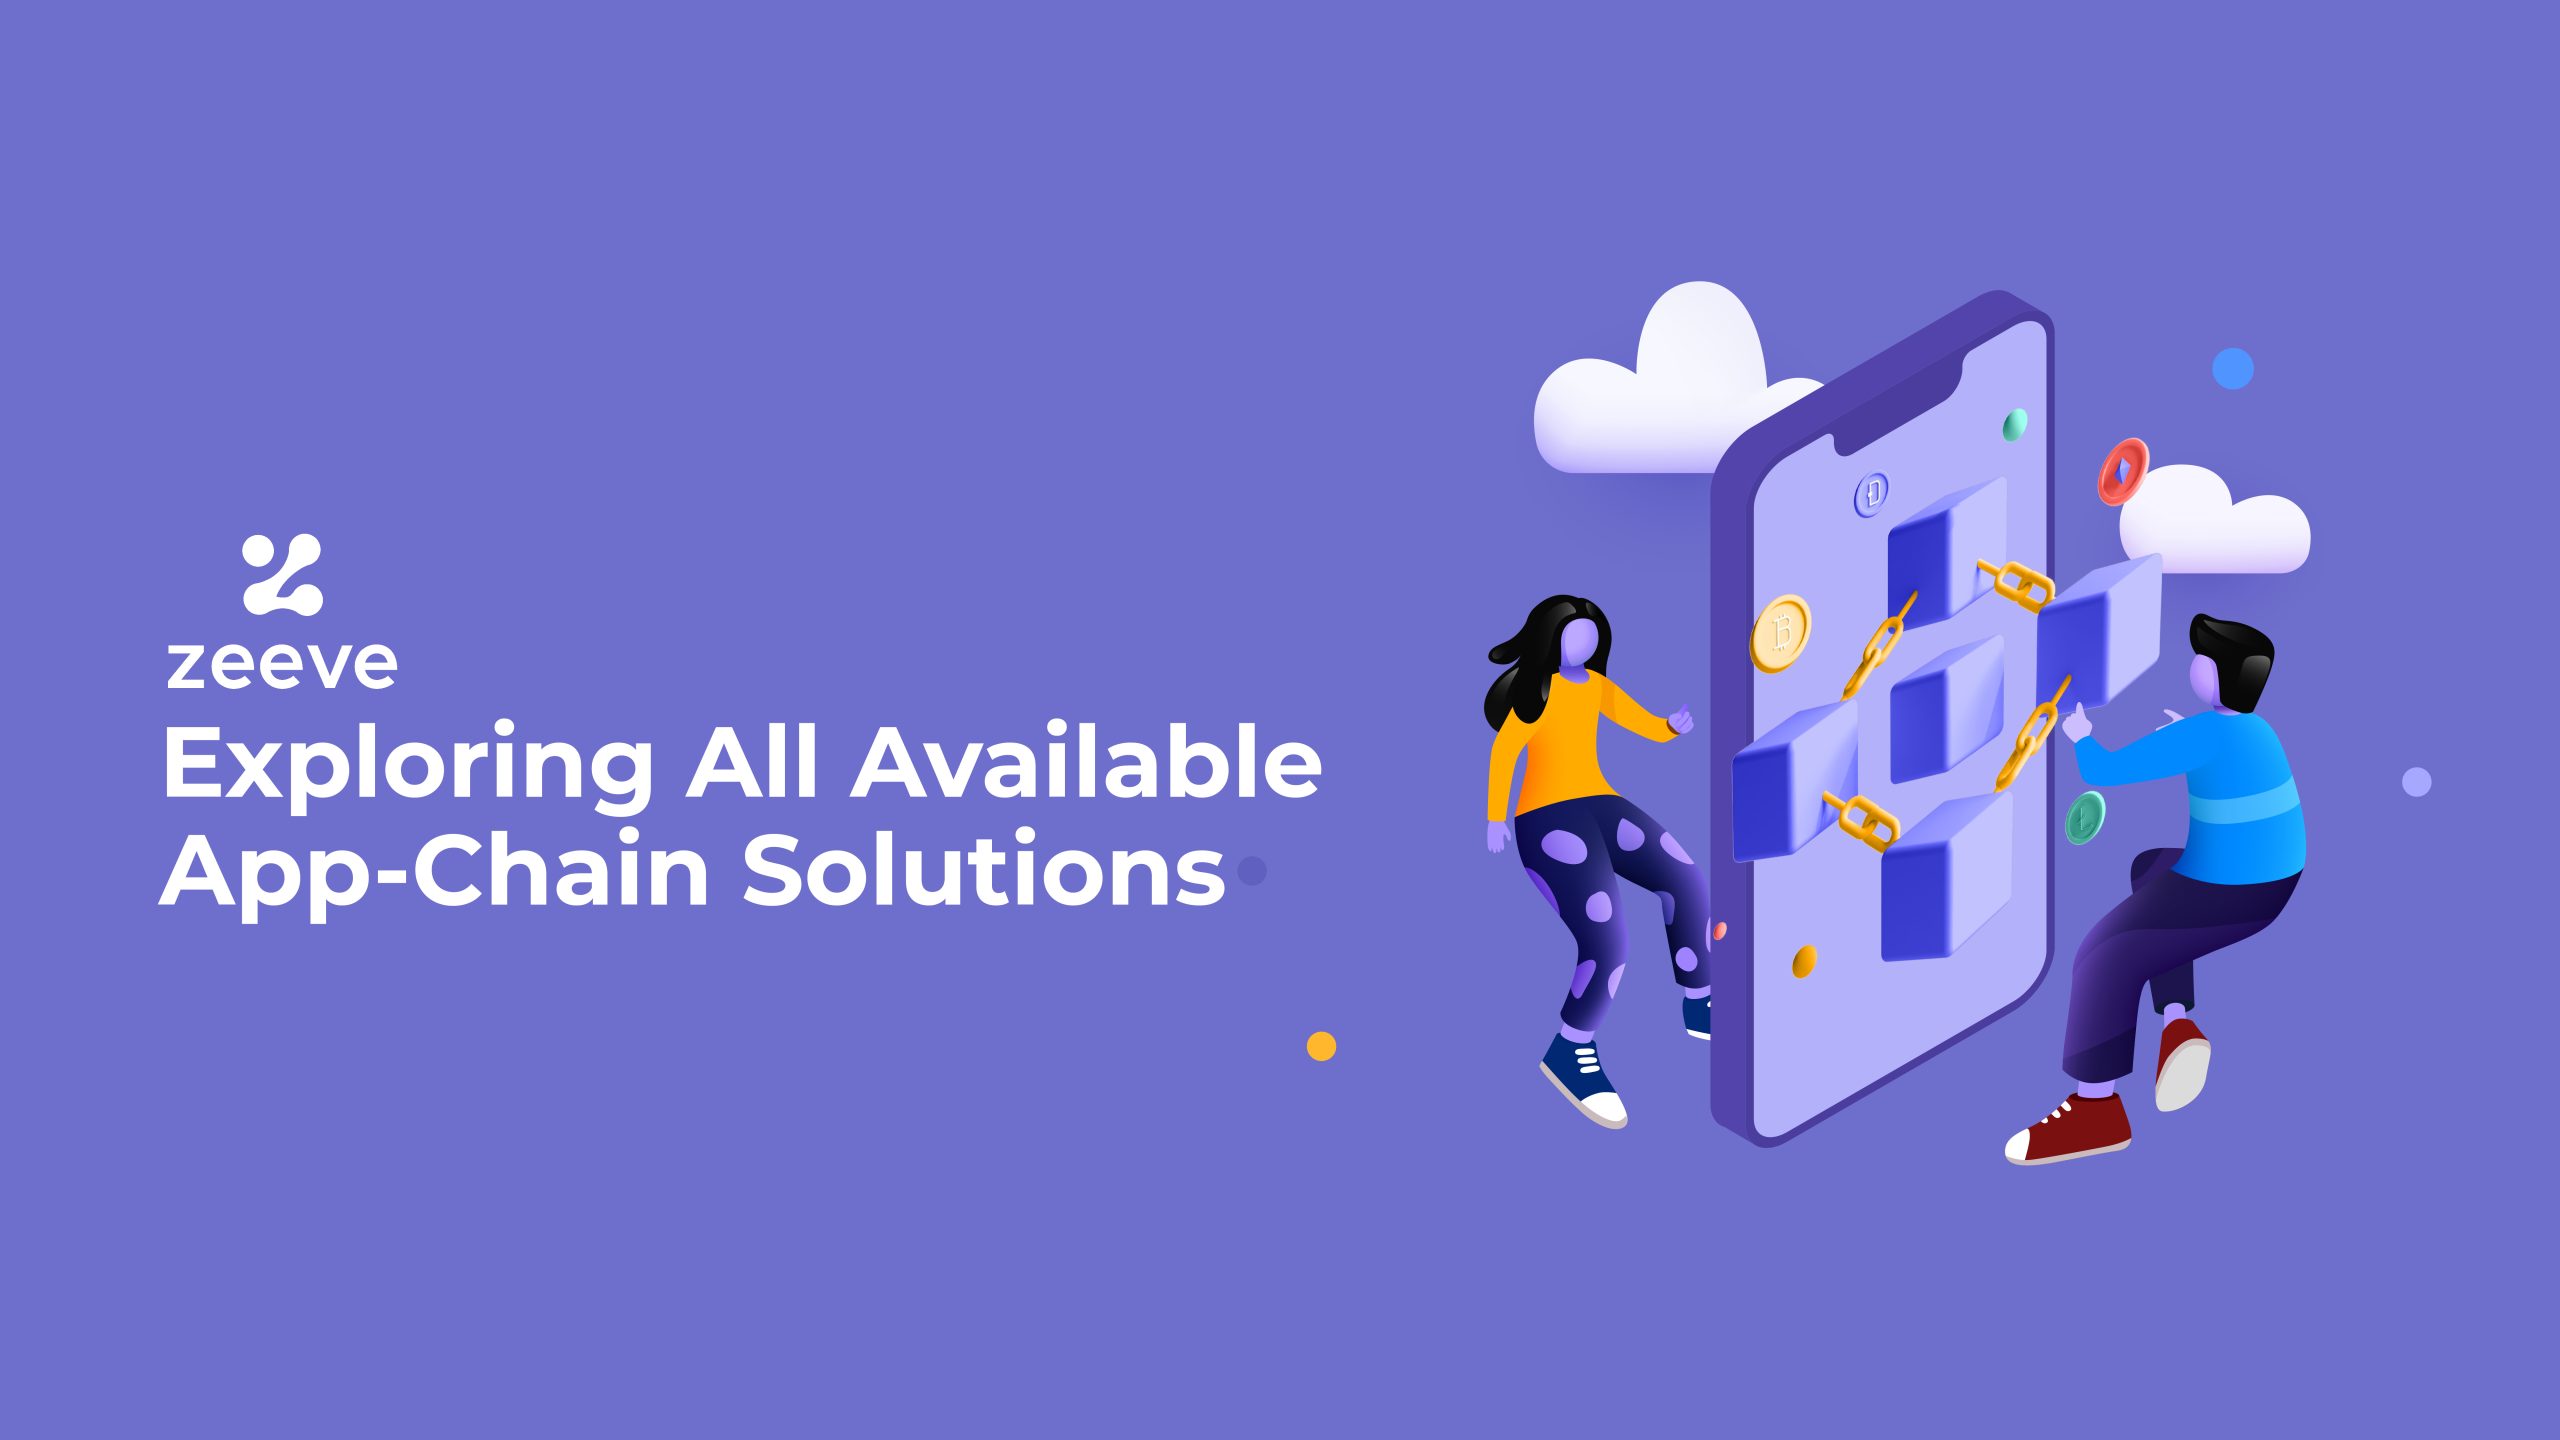 Appchain solutions